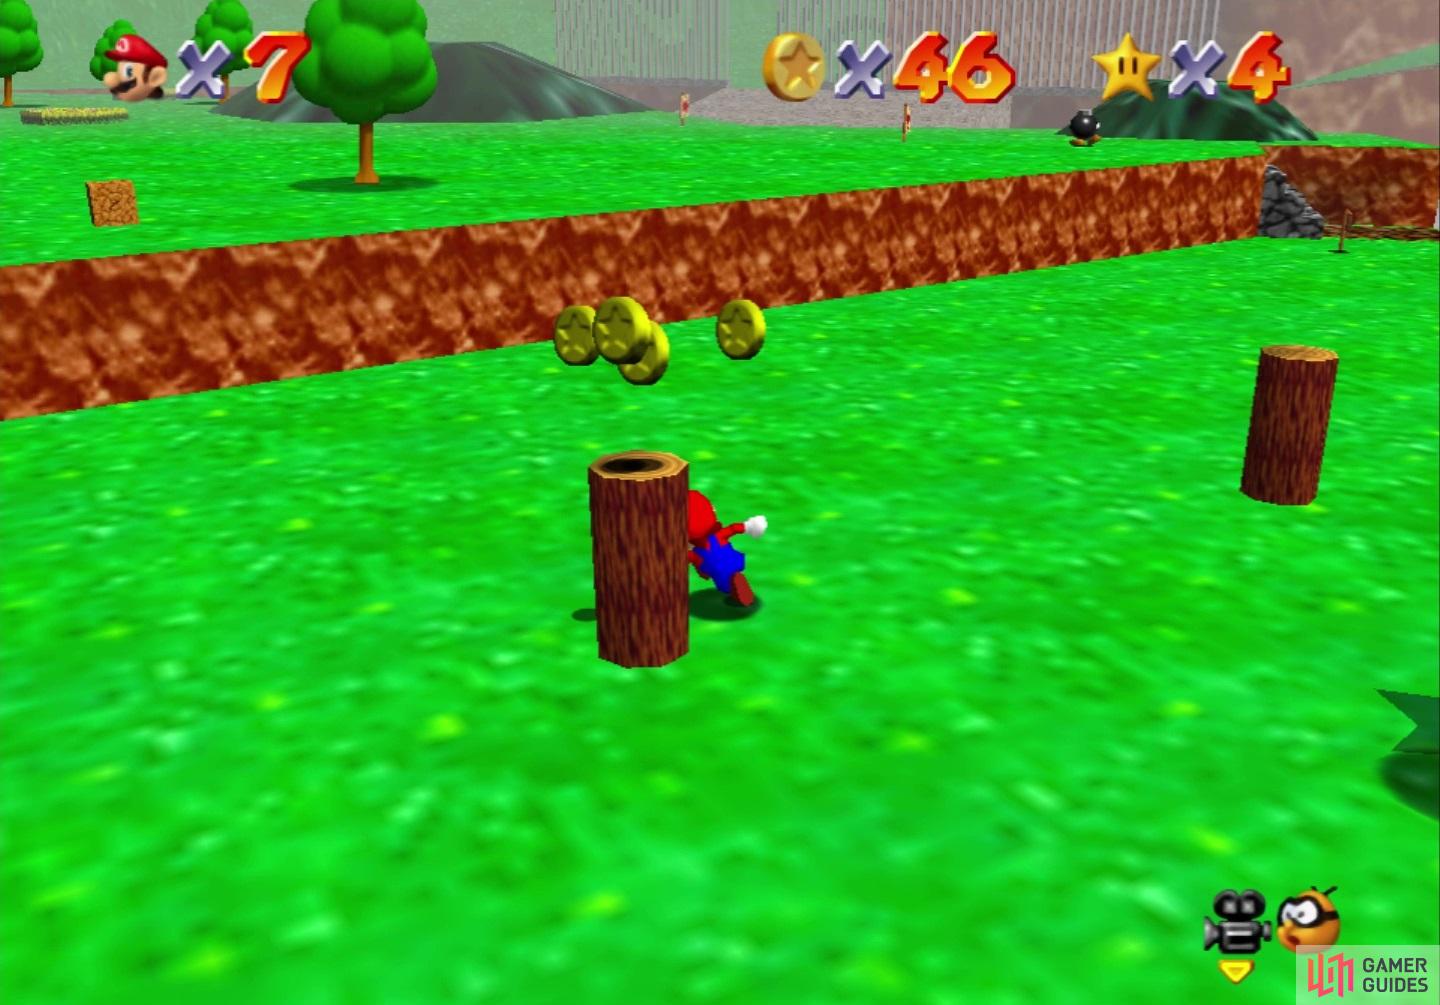 Run around these wooden posts to make them pop out some coins